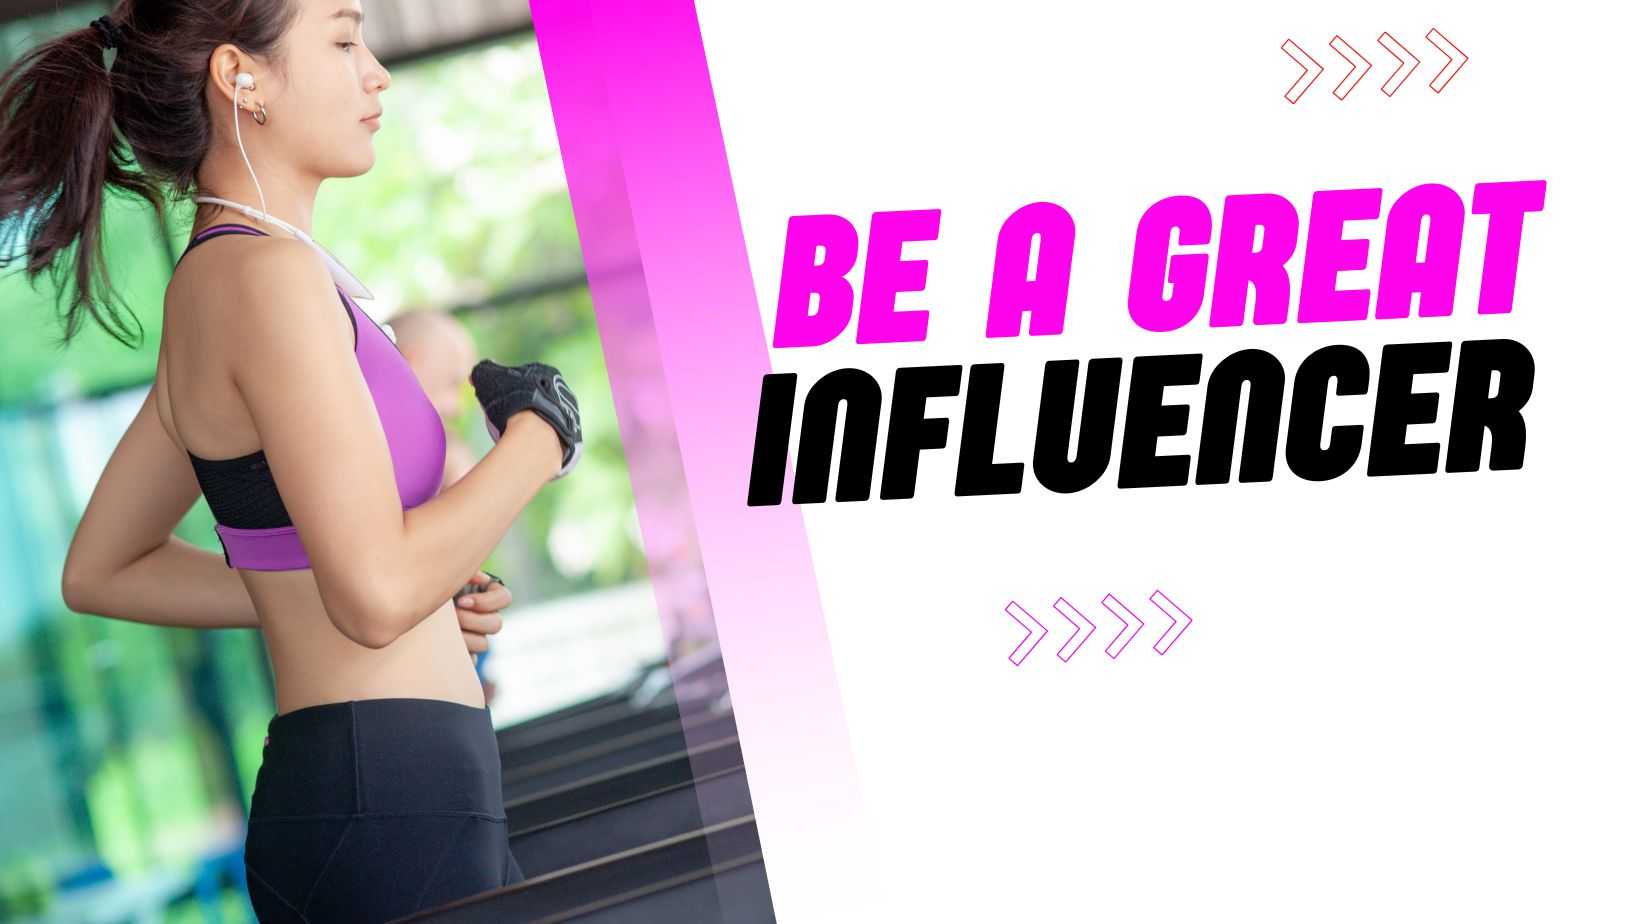 How you can become a great Influencer and build lasting connections